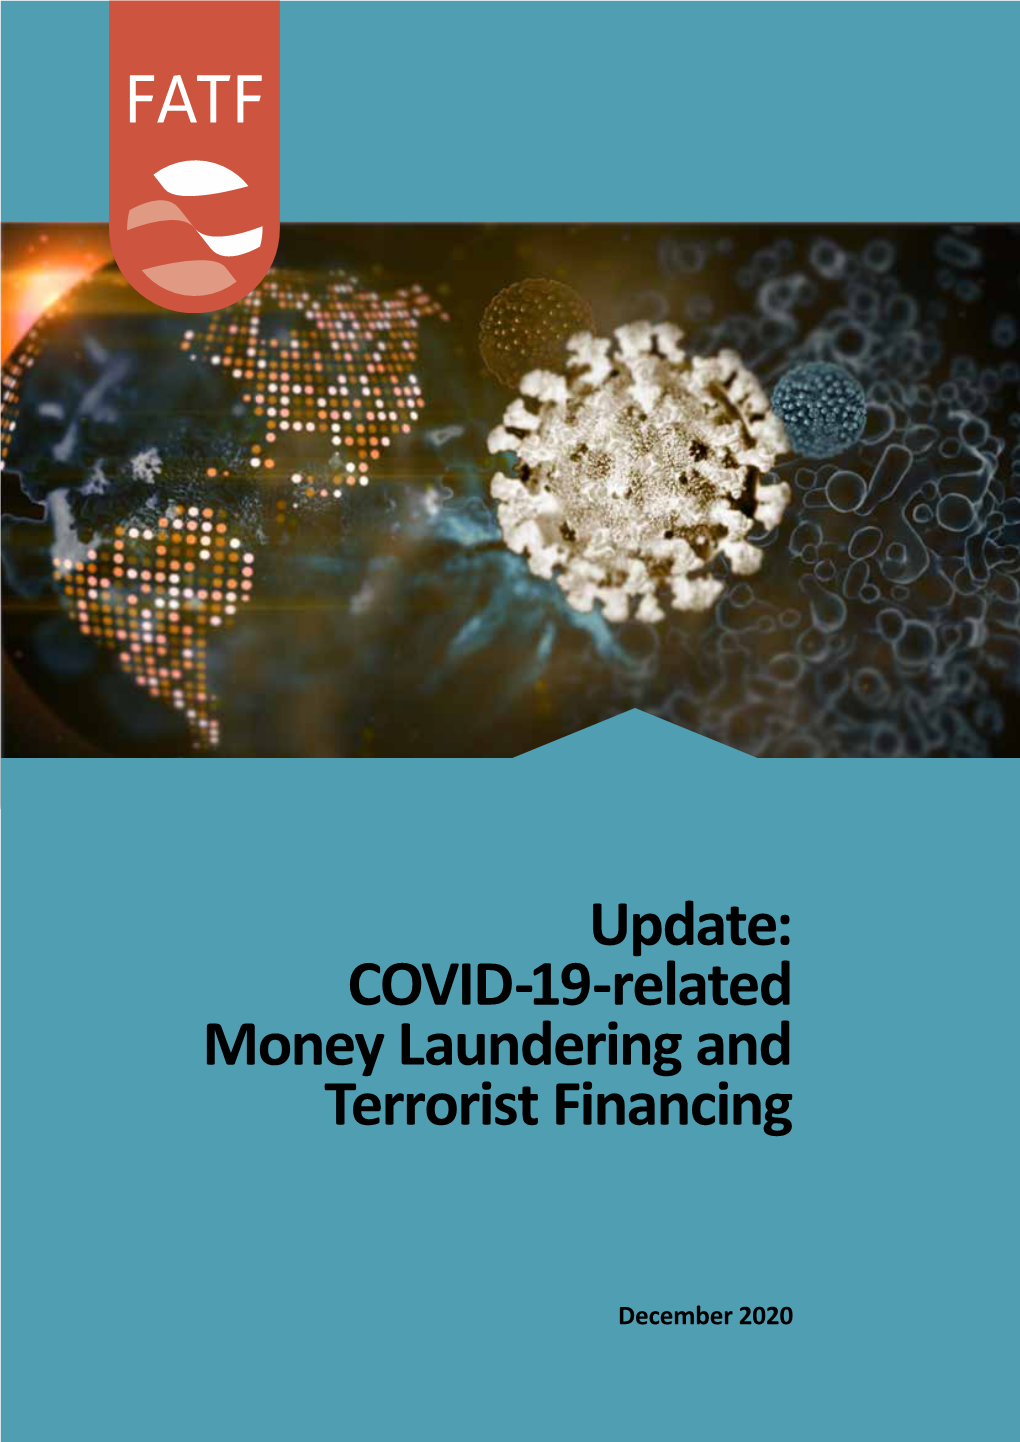 Update: COVID-19-Related Money Laundering and Terrorist Financing